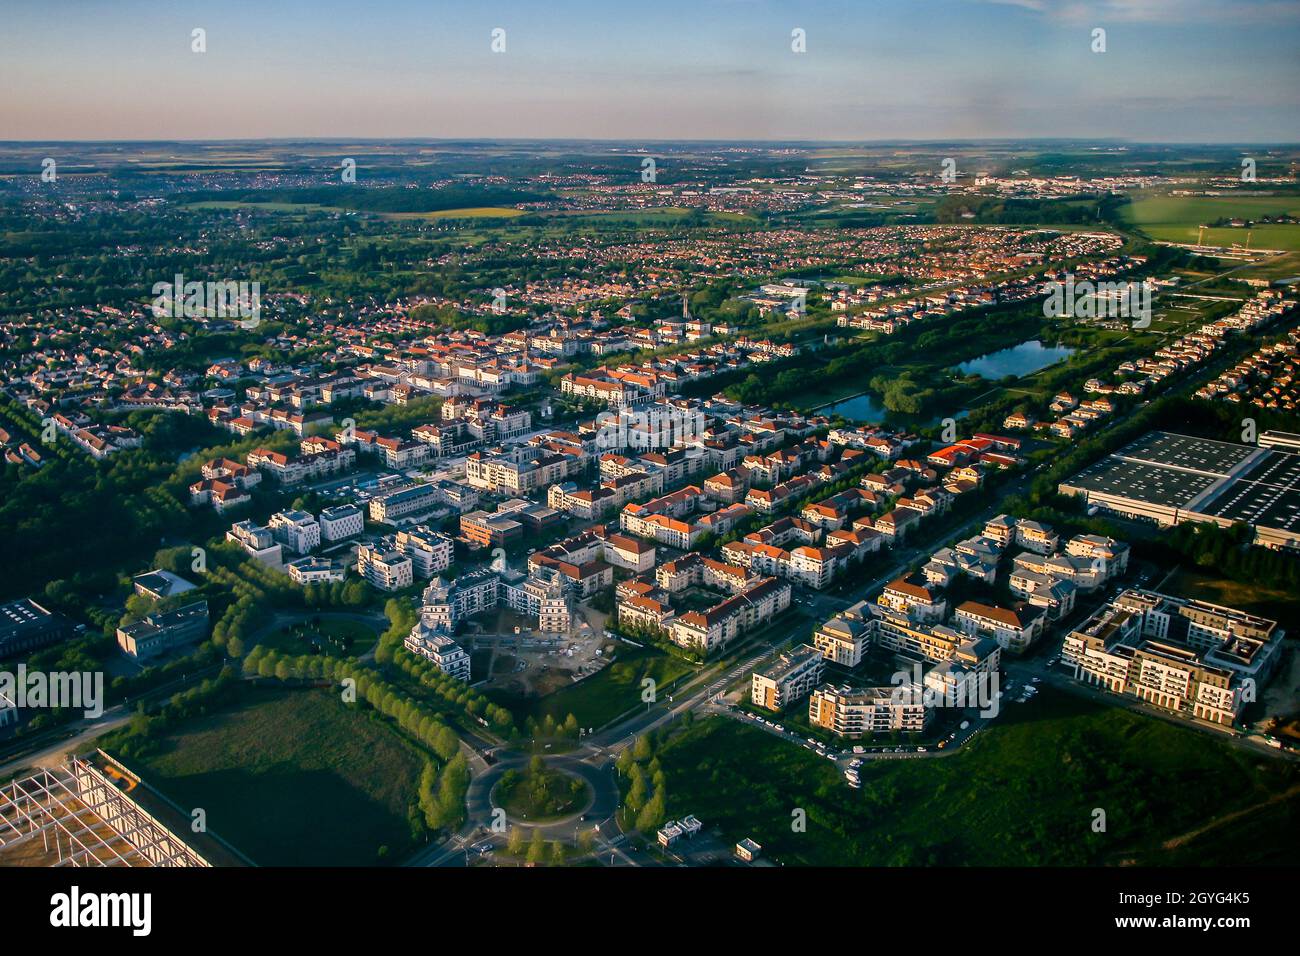 Aerial view of Bussy Saint Georges, an eastern suburb of Paris in the new city of Marne La Vallée - Planned community with a grid street plan Stock Photo